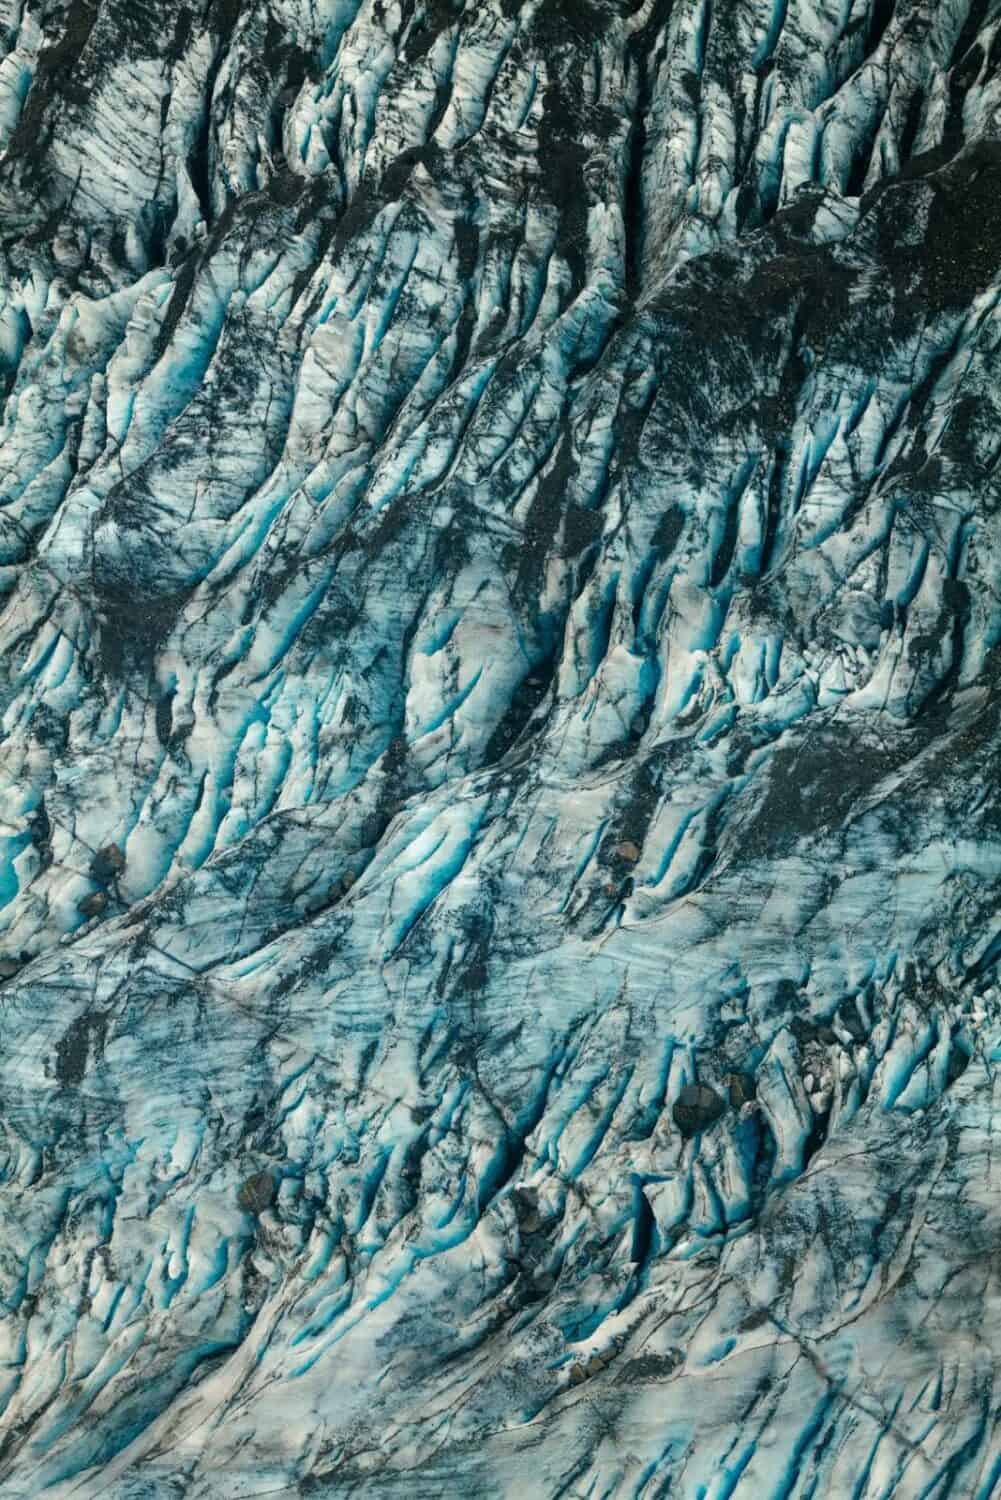 Textures of Alaska from the sky